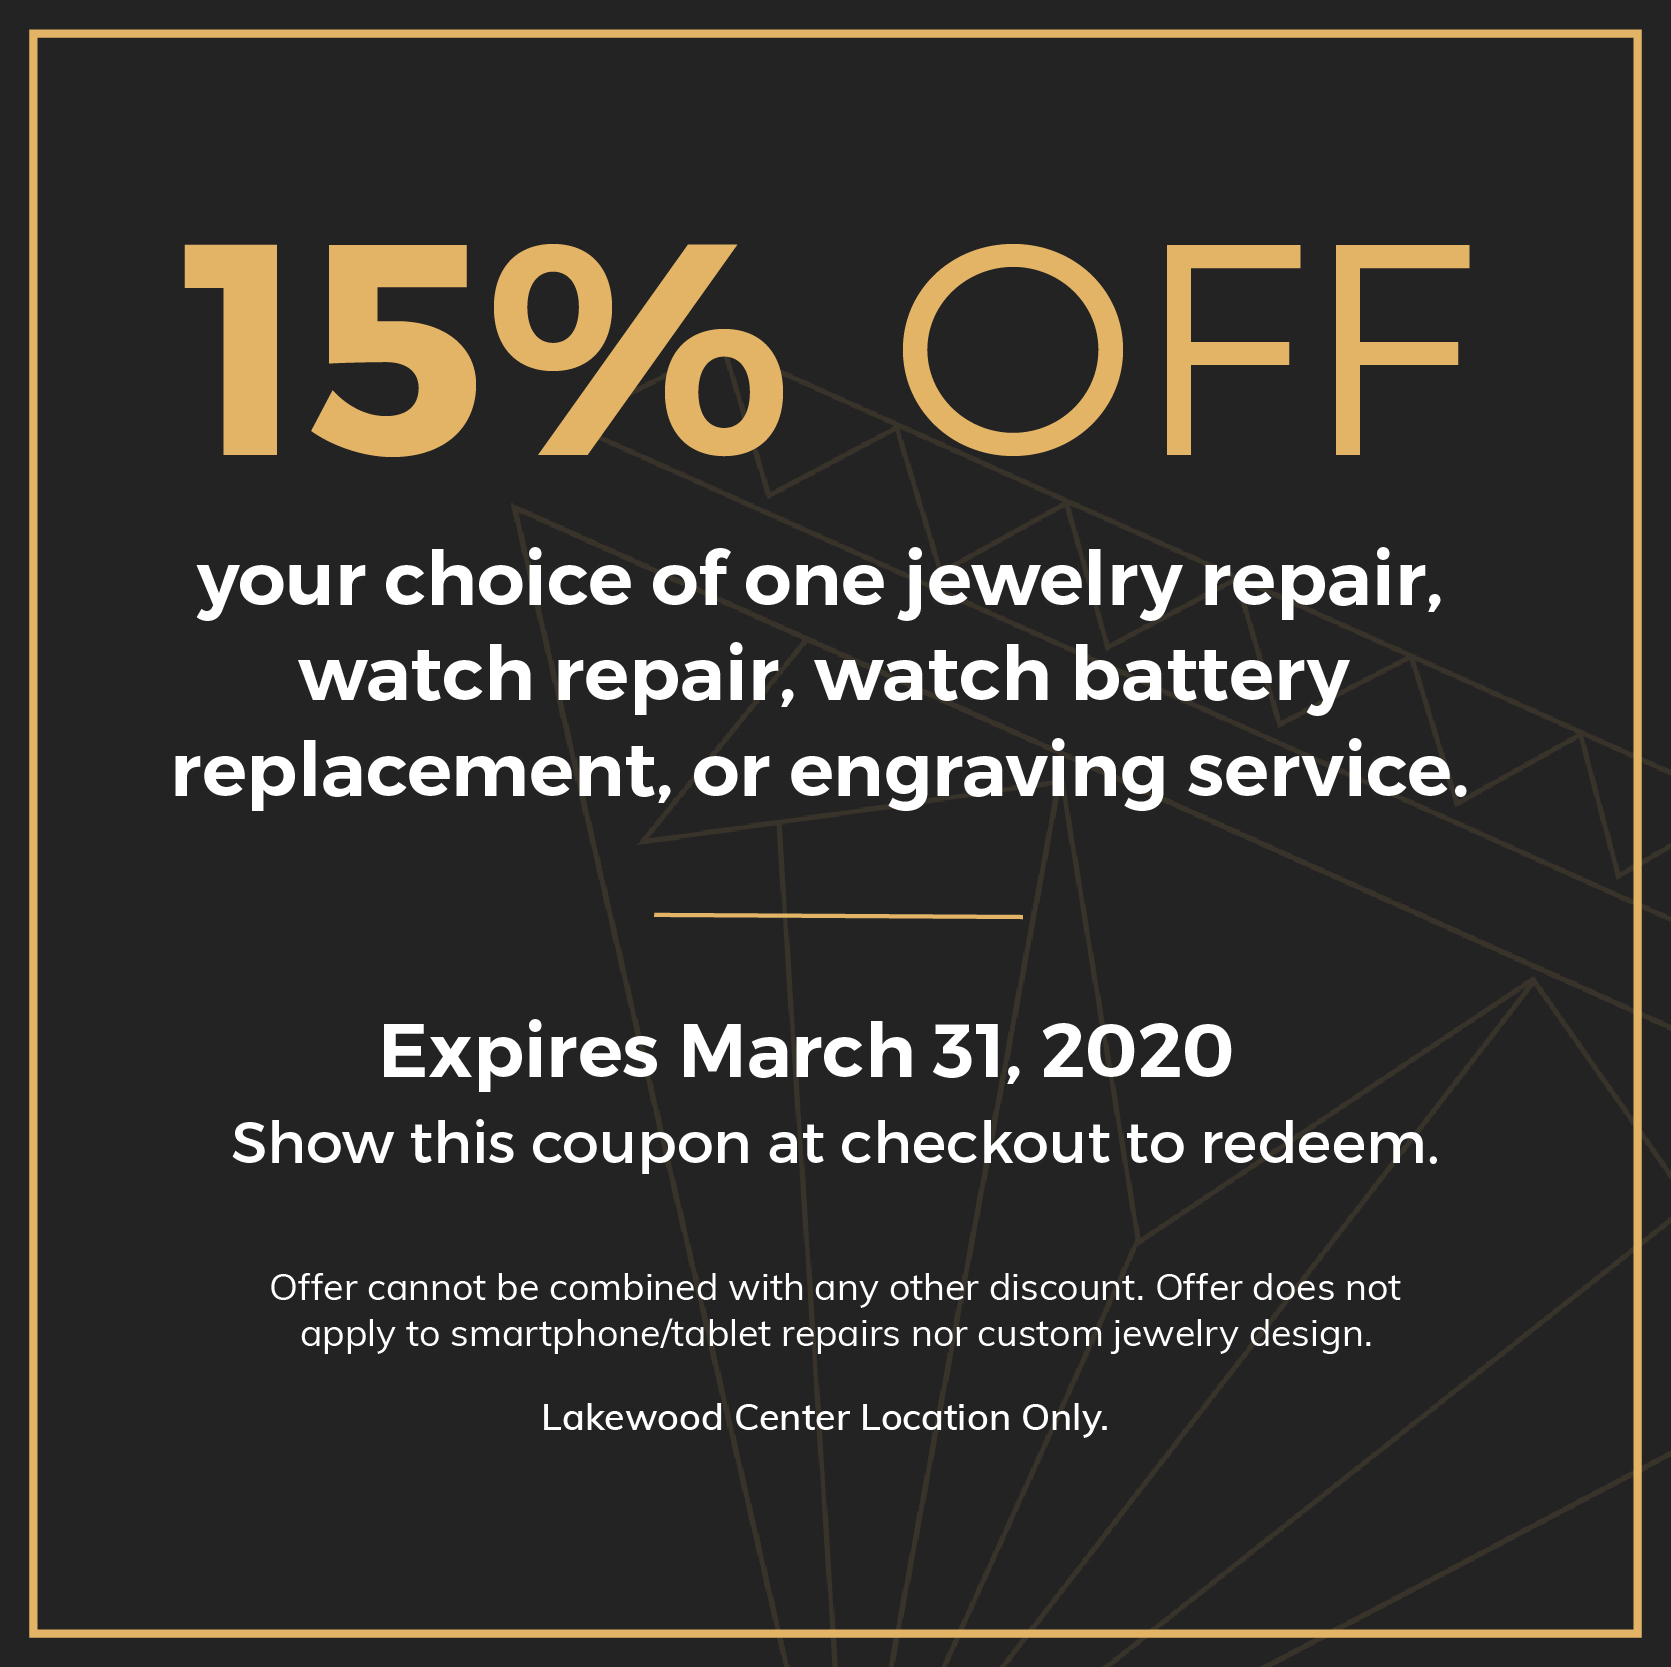 15% OFF. your choice of one jewelry repair, watch repair, watch battery replacement, or engraving service. Expires March 31, 2020. Show this coupon at checkout to redeem. Offer cannot be combined with any other discount. Offer does not apply to smartphone/tablet repairs nor custom jewelry design. Lakewood Center Location Only.